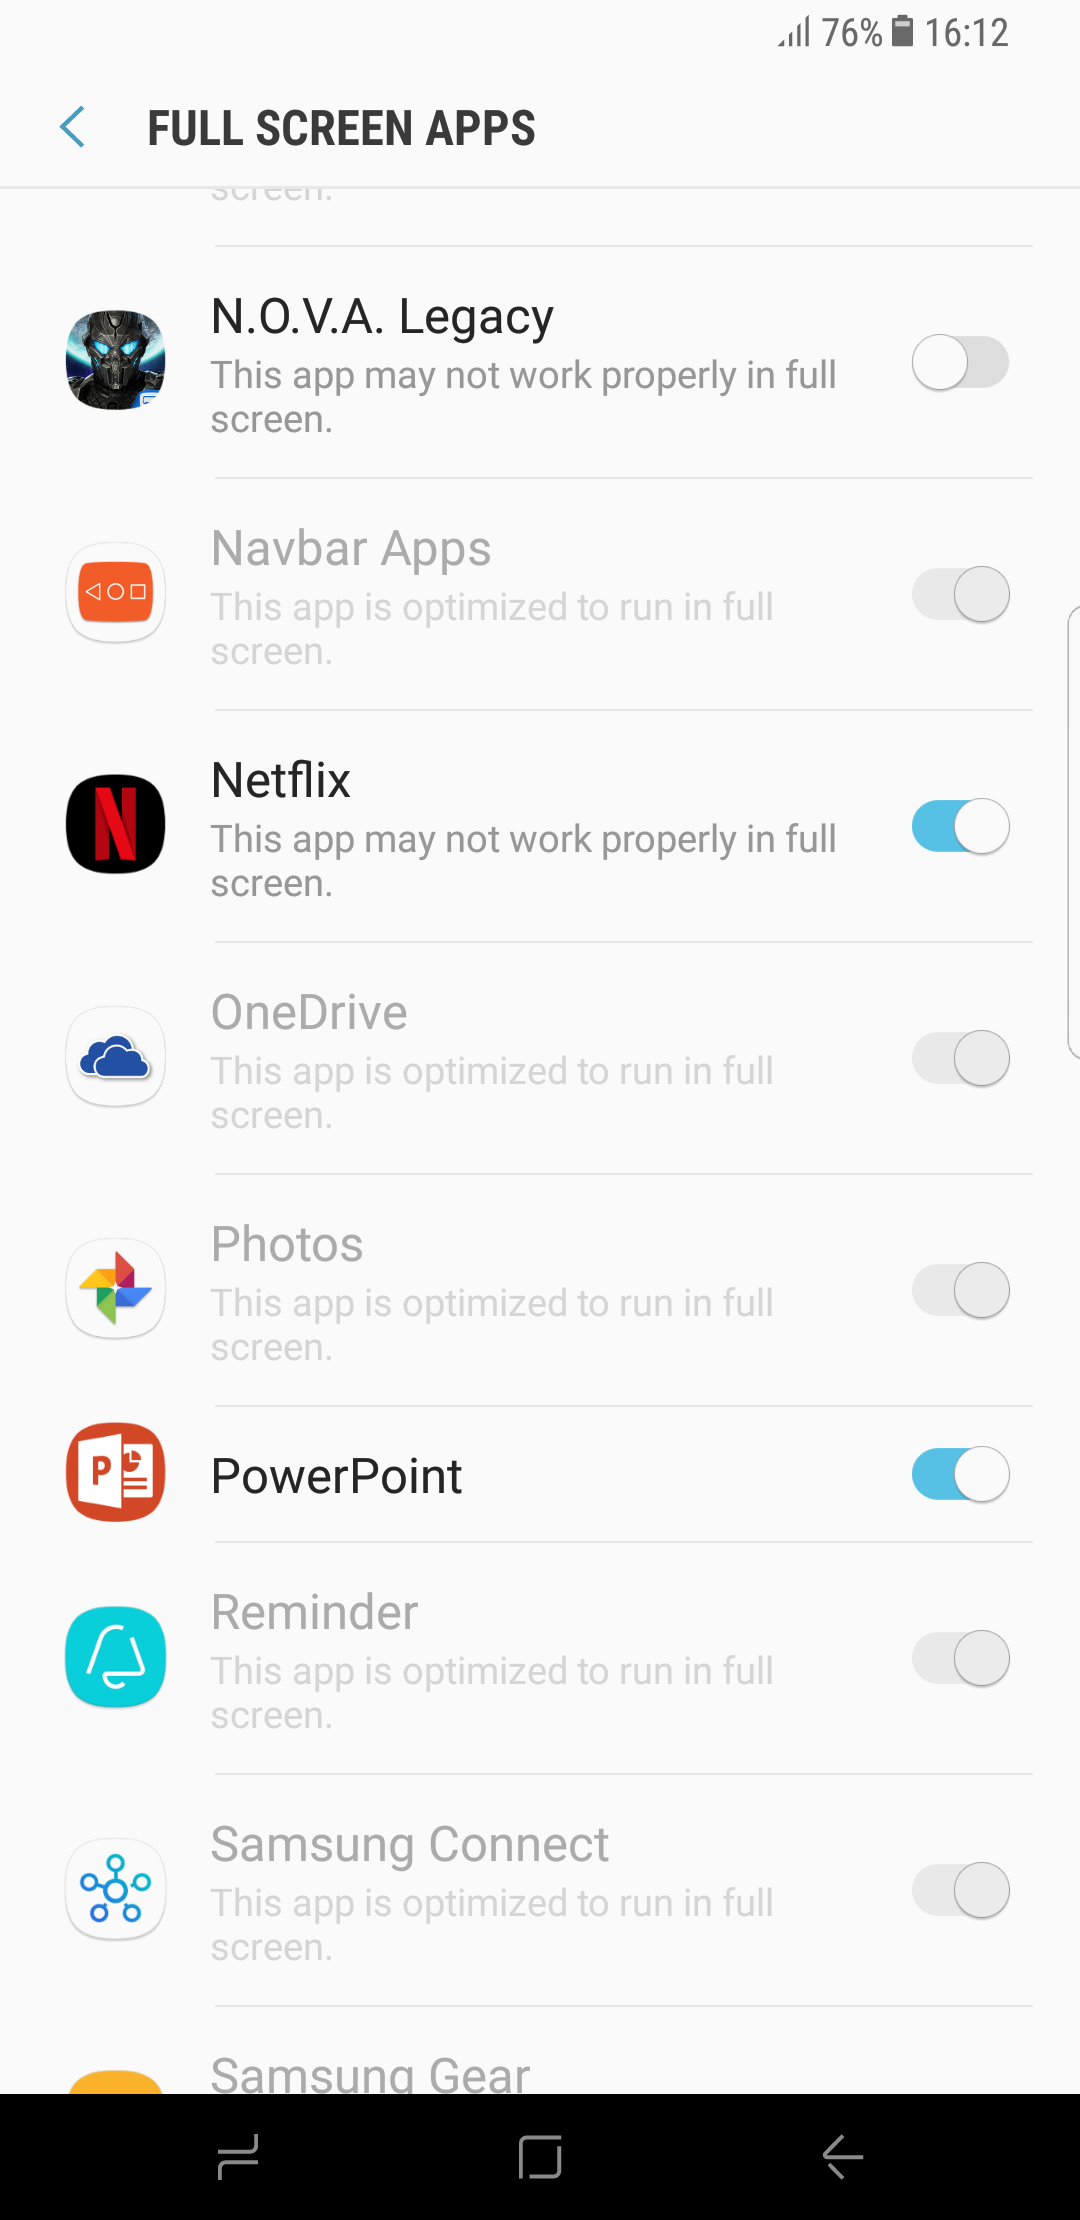 3rd party apps have to be added to the Full Screen compatibility list manually - You got cropped! Galaxy S8 and S8+ video display grief comes in stages, here's why